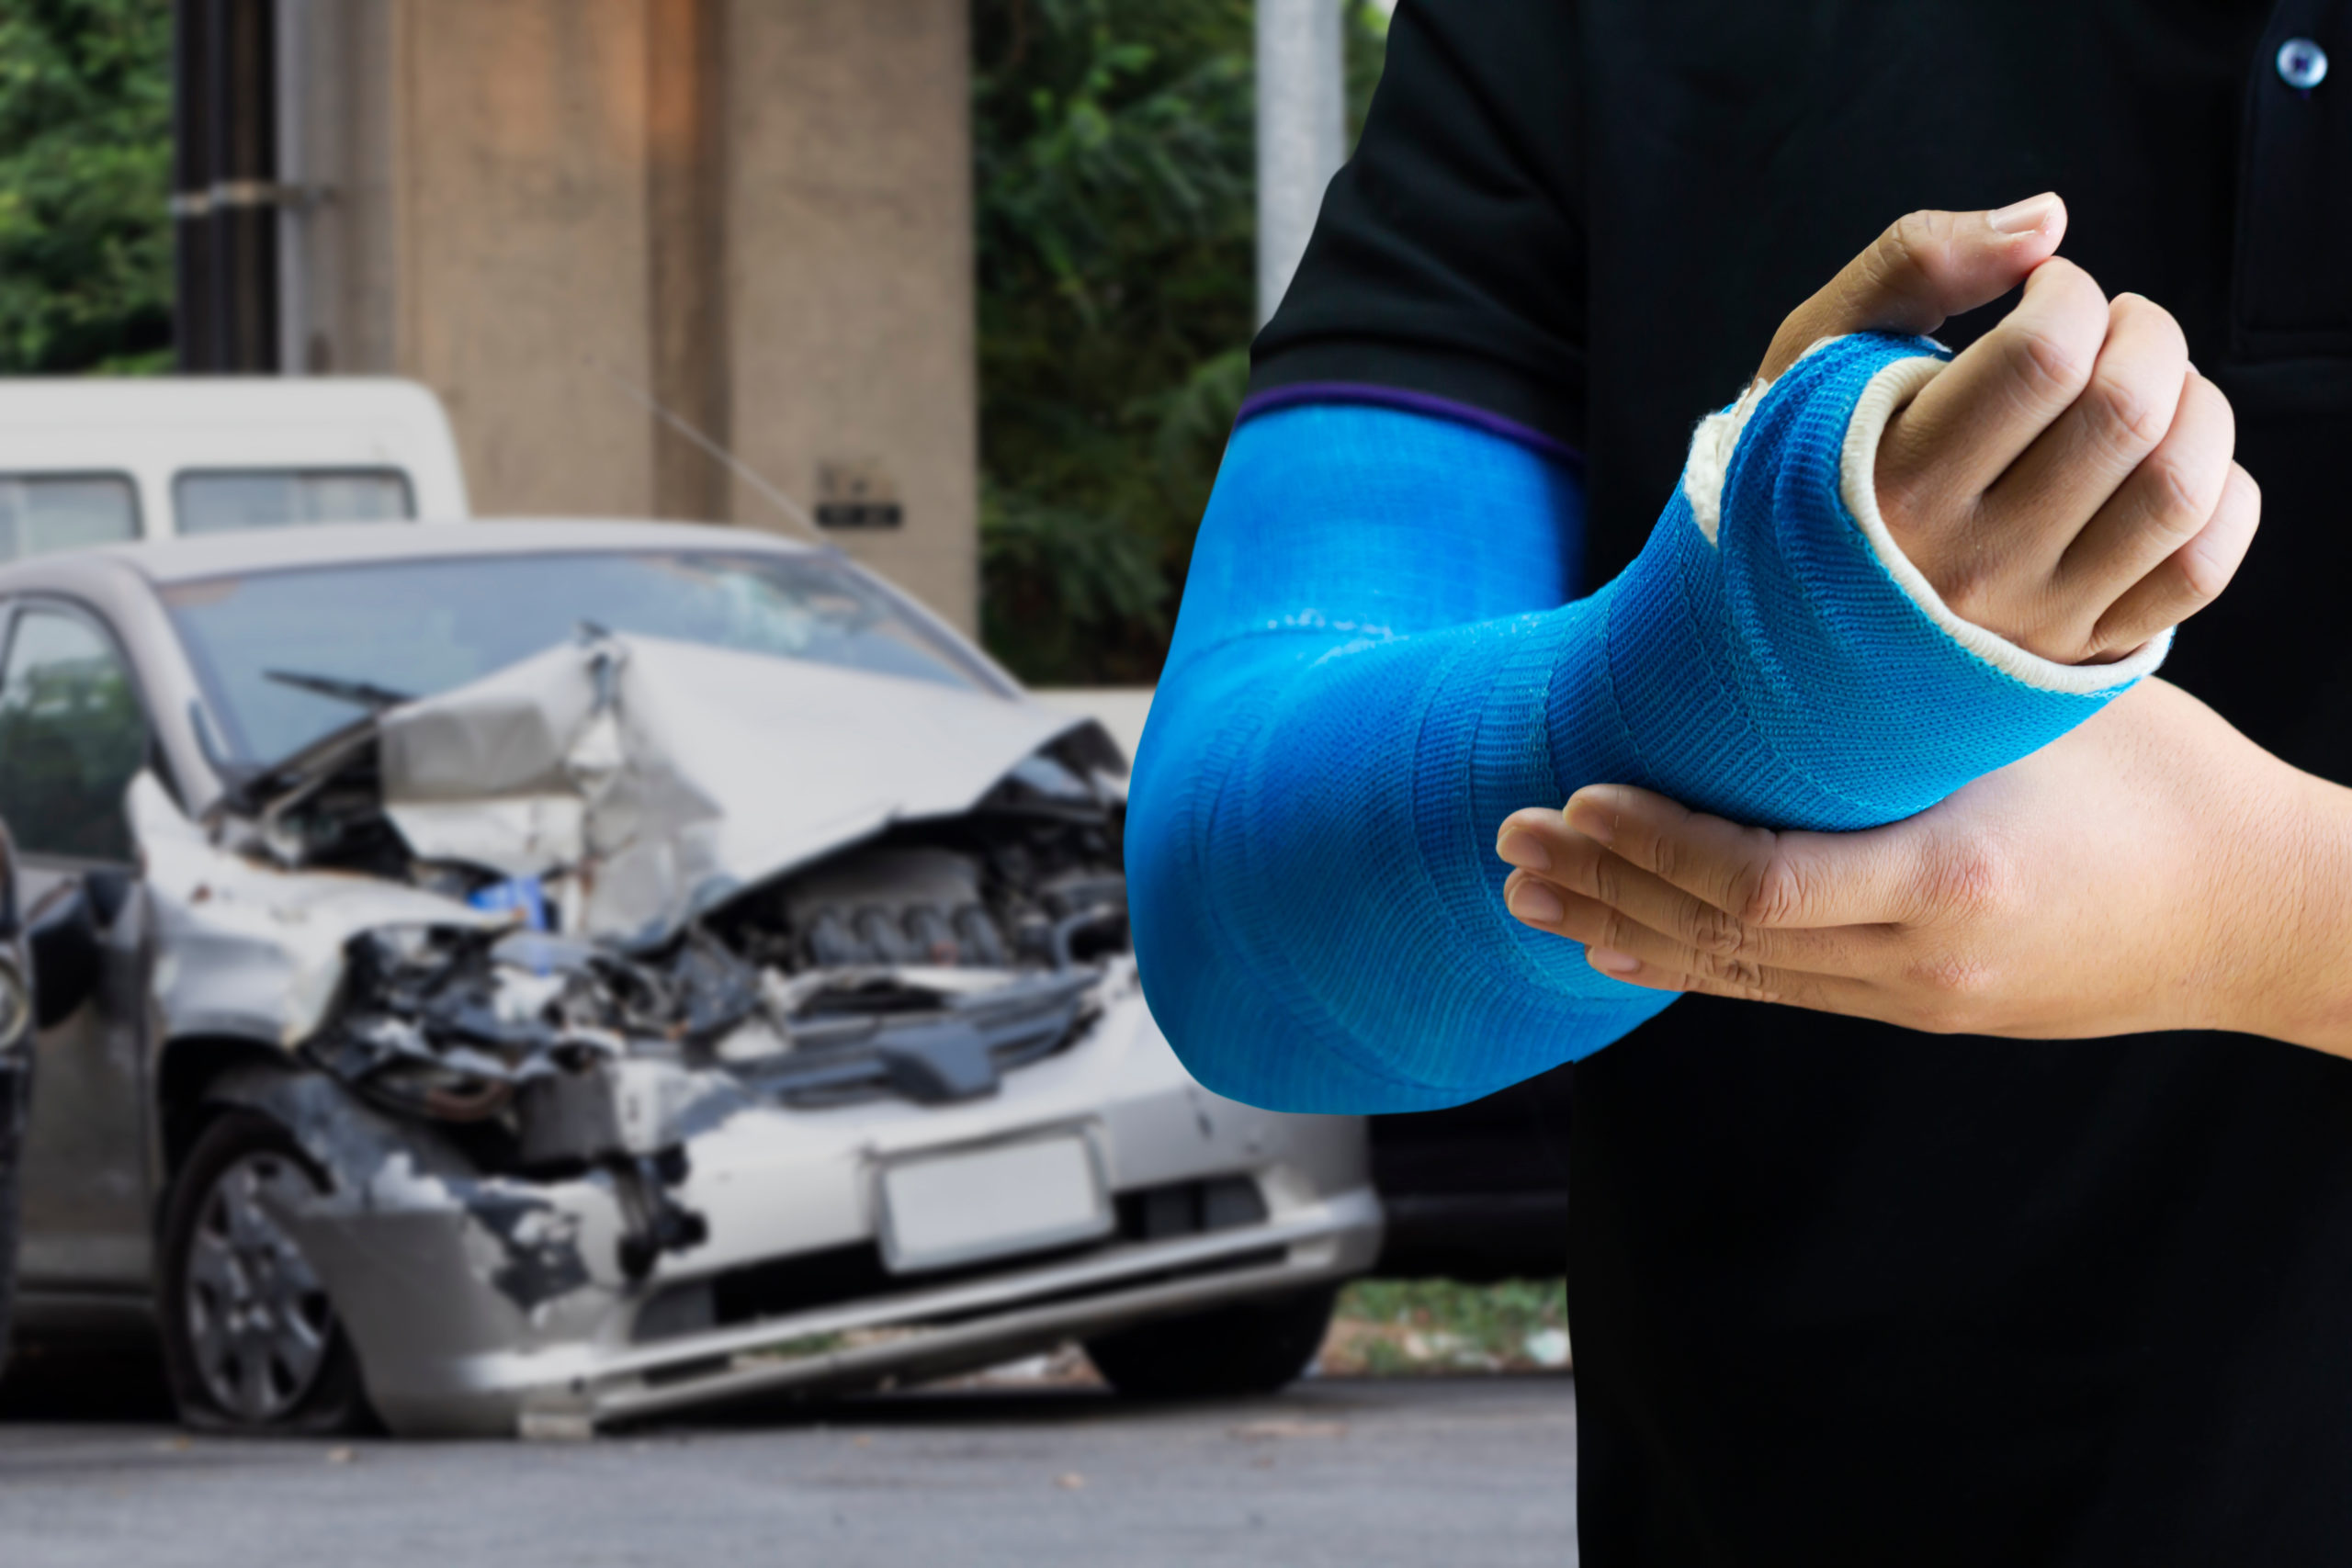 A person in a black shirt wearing a blue cast on their forearm, with a heavily damaged car in the background, implying an auto accident injury.